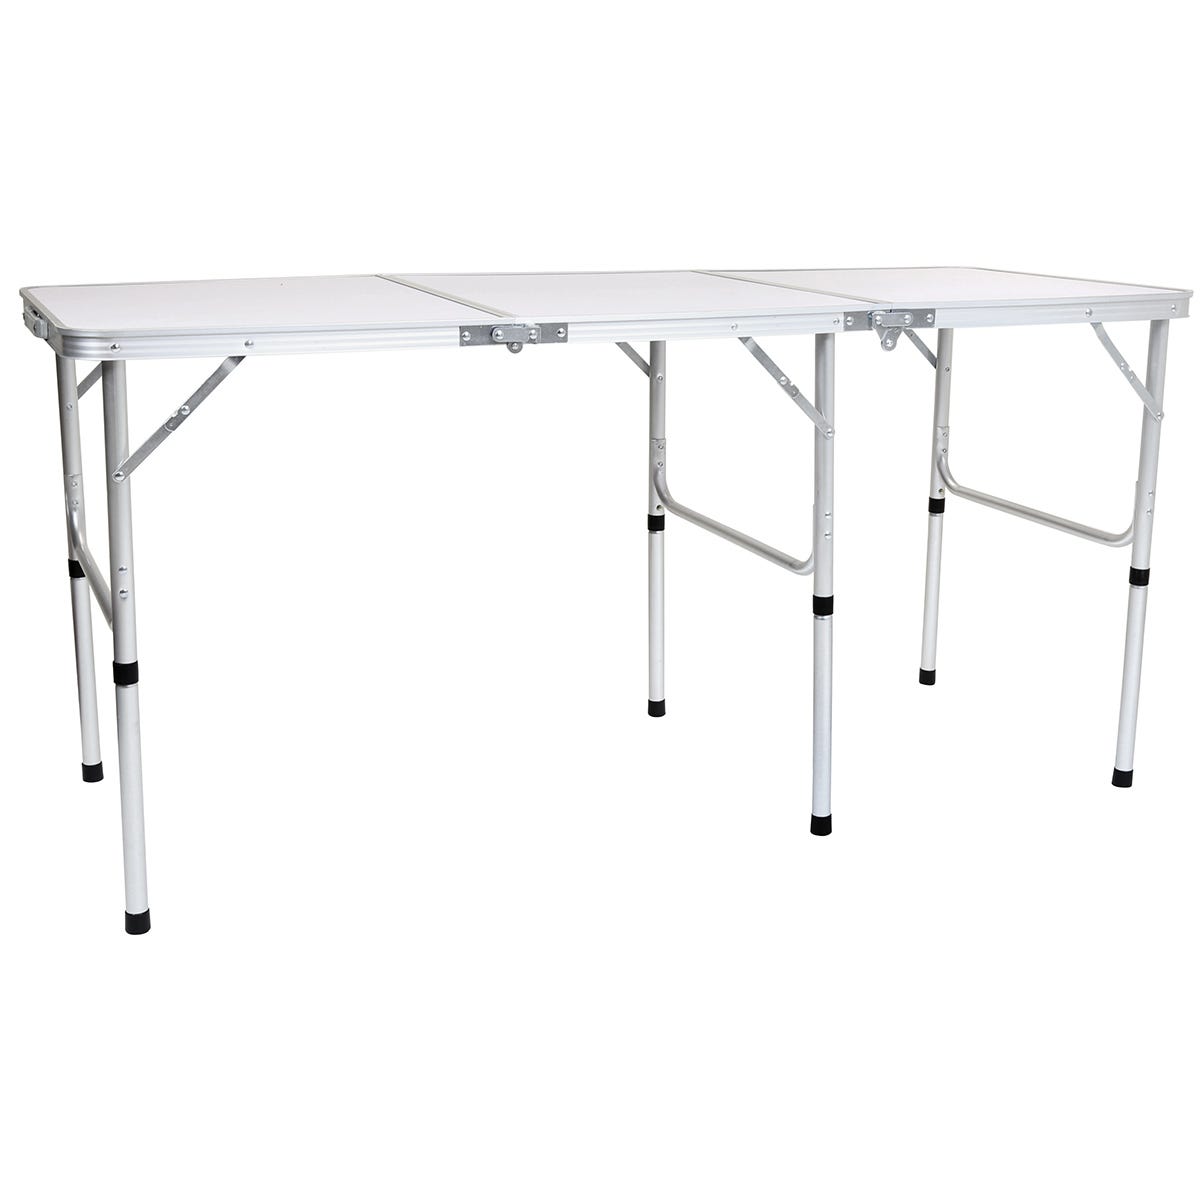 Charles Bentley Odyssey Extending Folding Picnic Table